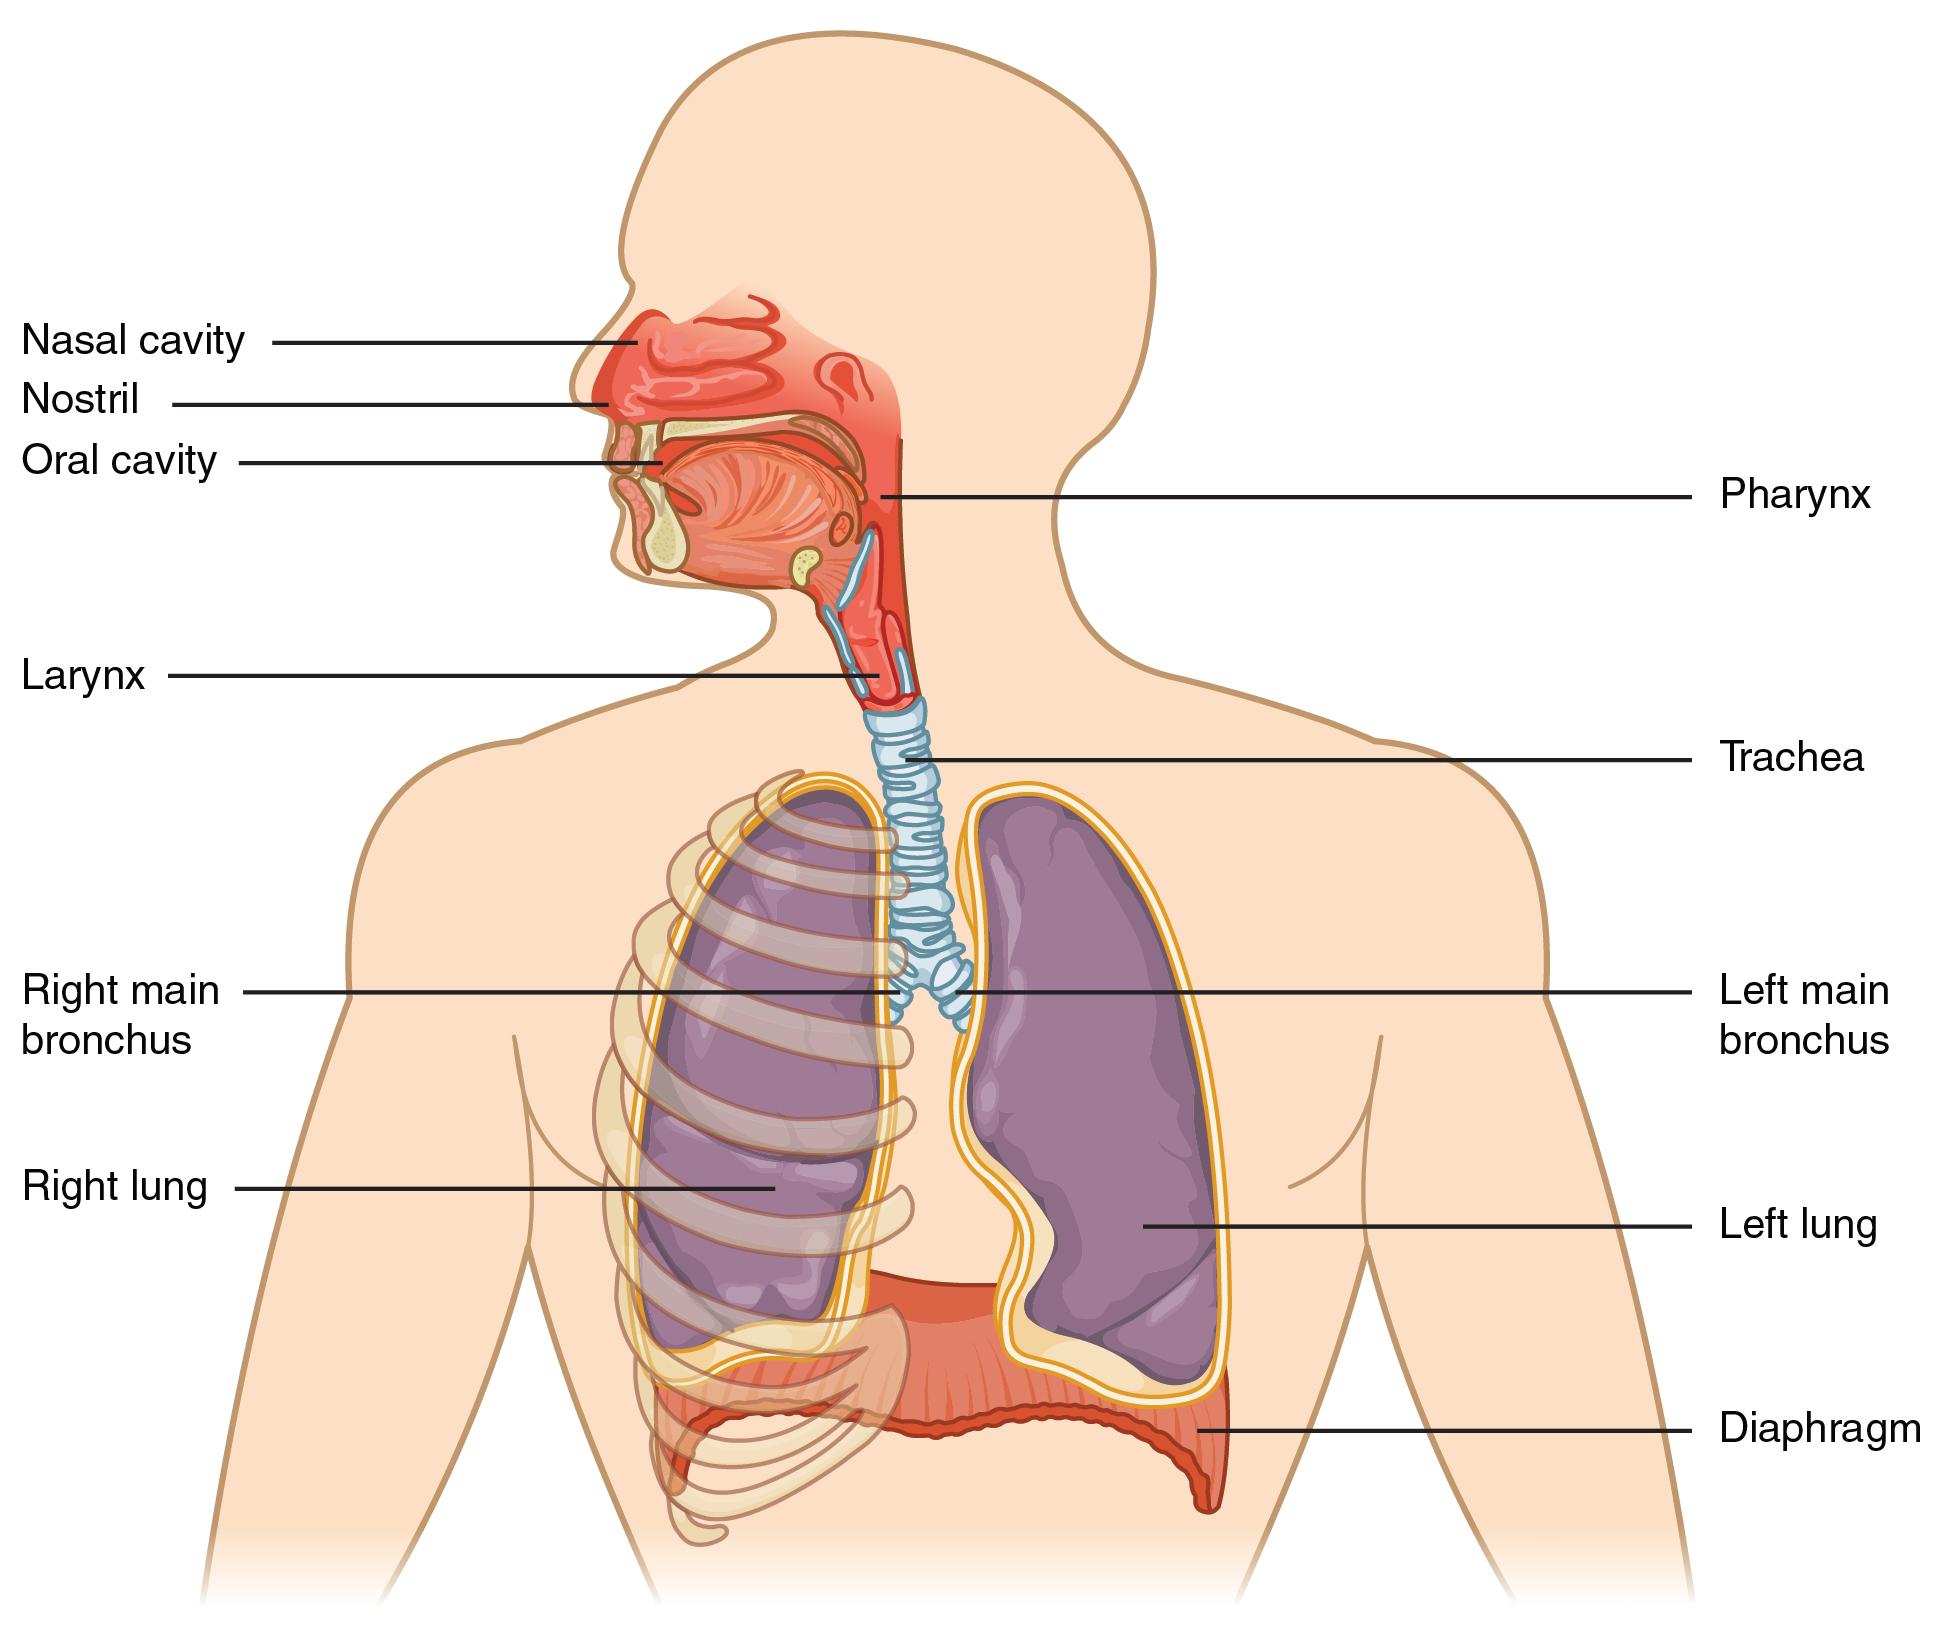 Major Respiratory Structures, Labeled